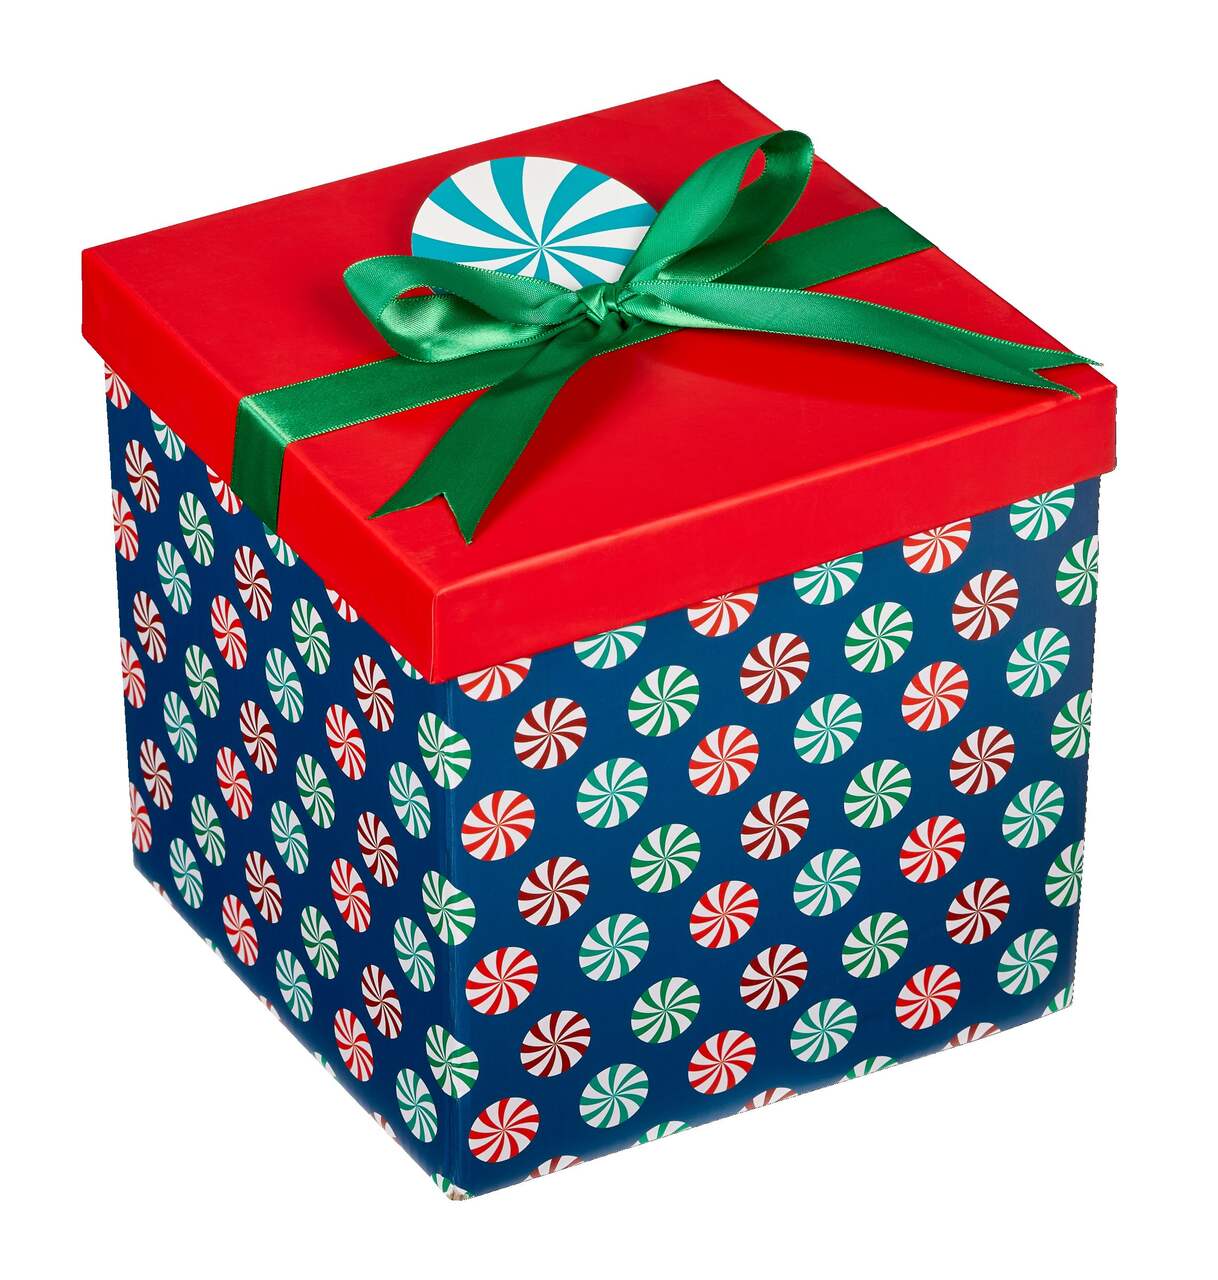 FOR LIVING Foldable Square Holiday Gift Box with Lid, Small, Candy